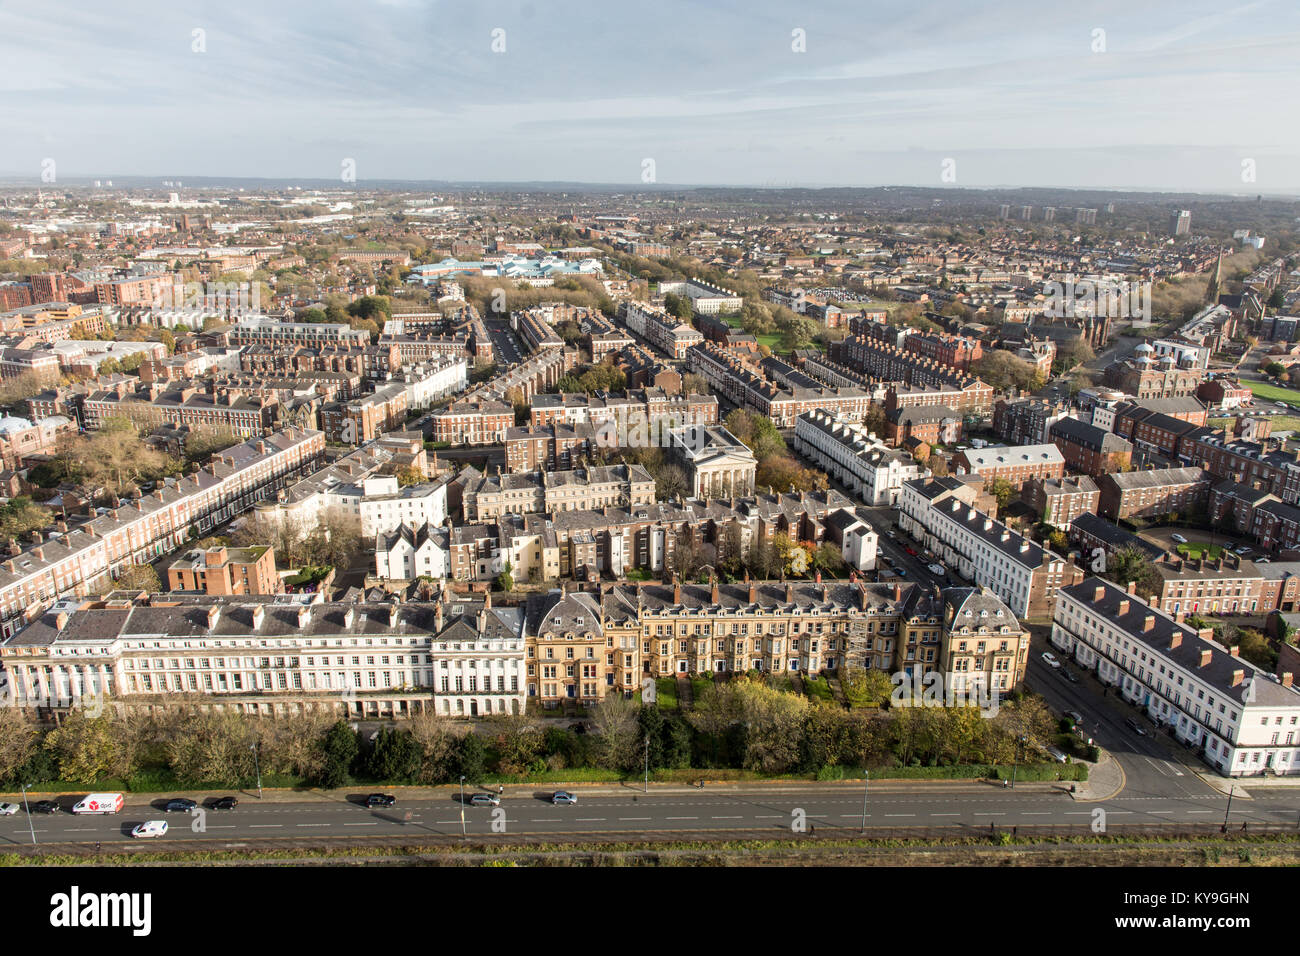 Liverpool, England, UK - November 9, 2017:  Terraces of houses line wide streets in Liverpool's Georgian Quarter suburb. Stock Photo